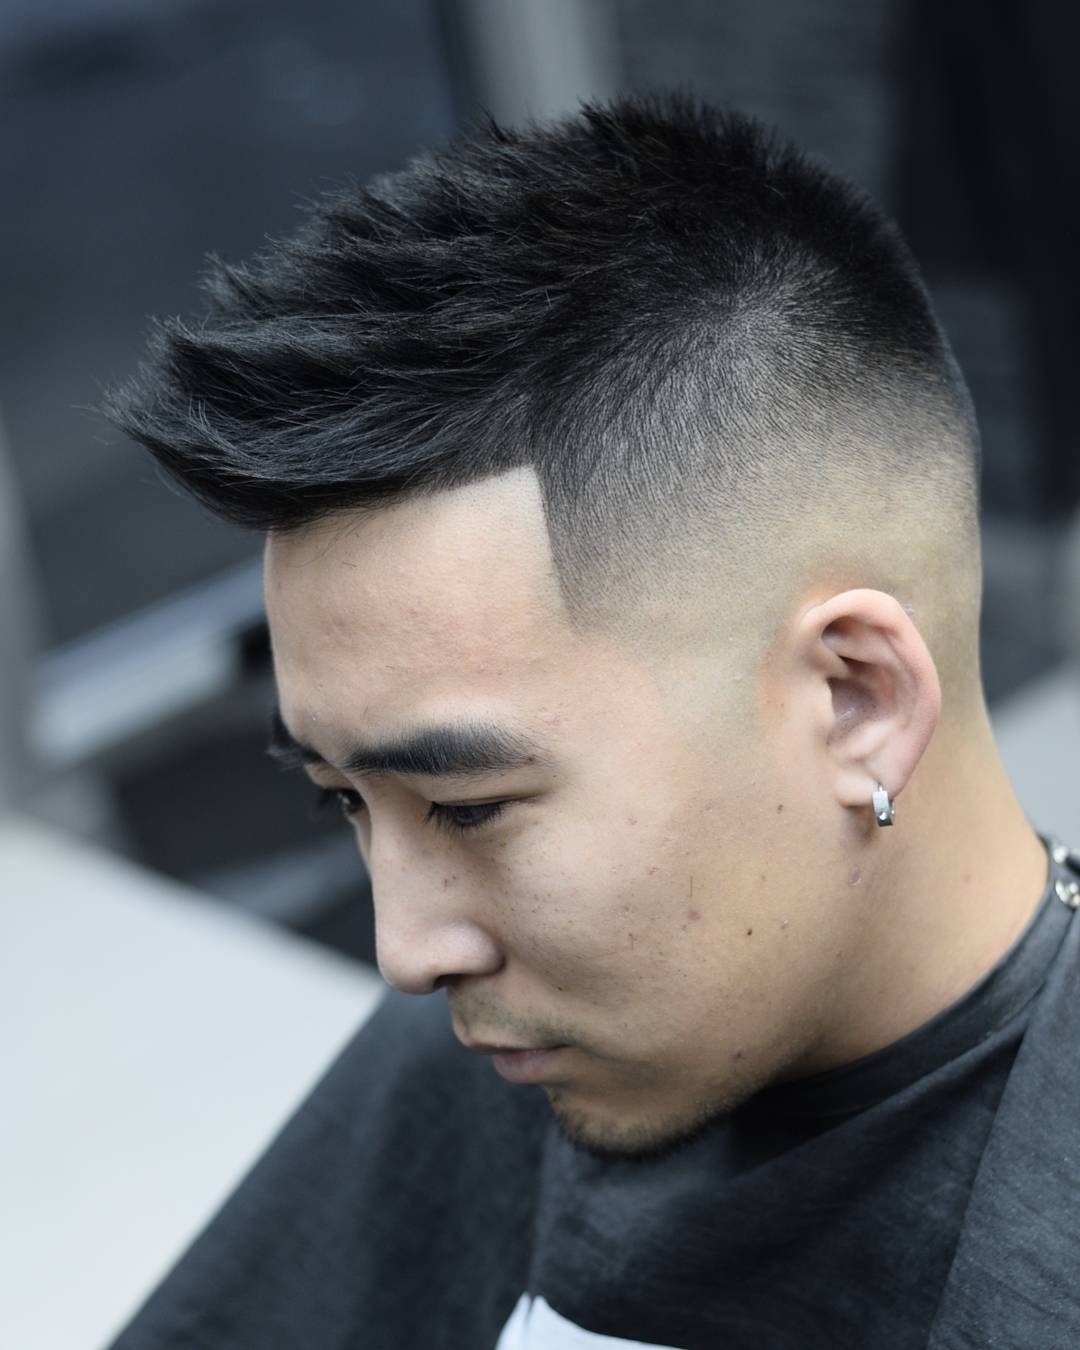 Best Hairstyles For Asian Men inside The best Asian Hairstyles 2019 Male